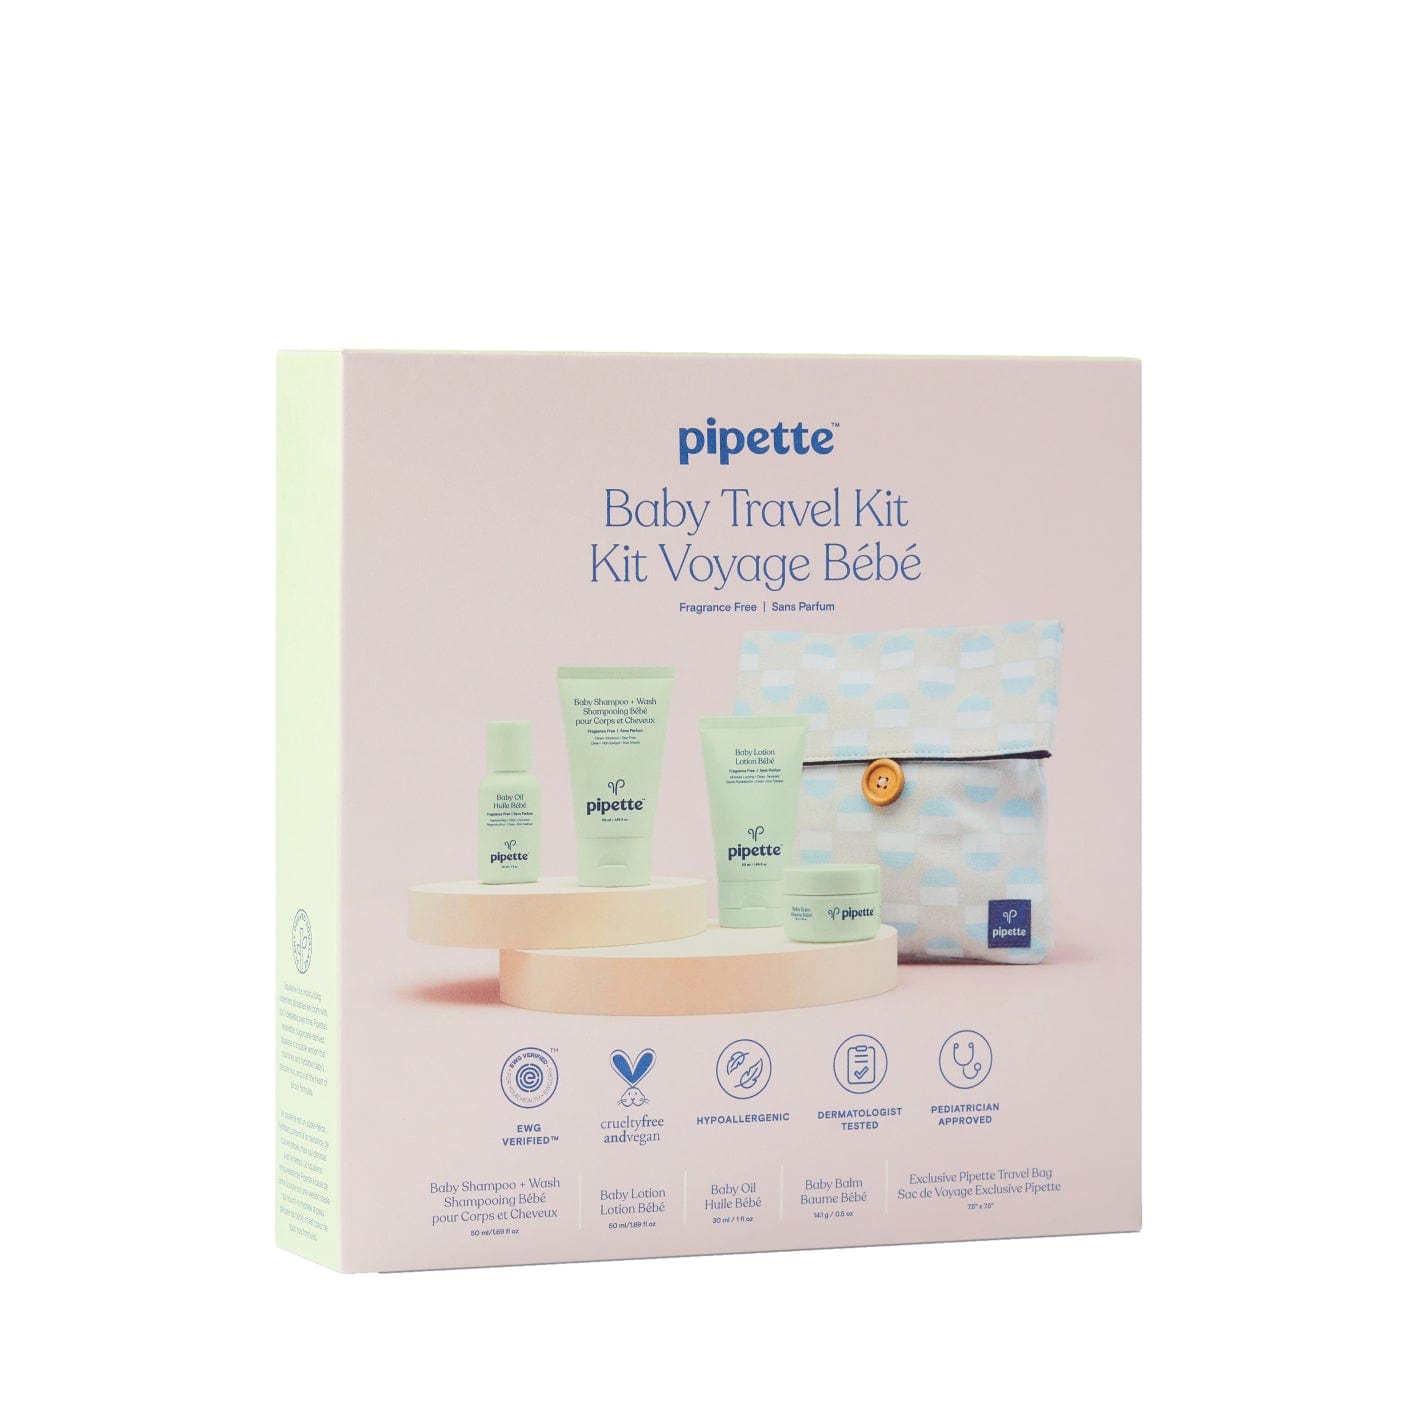 baby travel kit by pipette baby